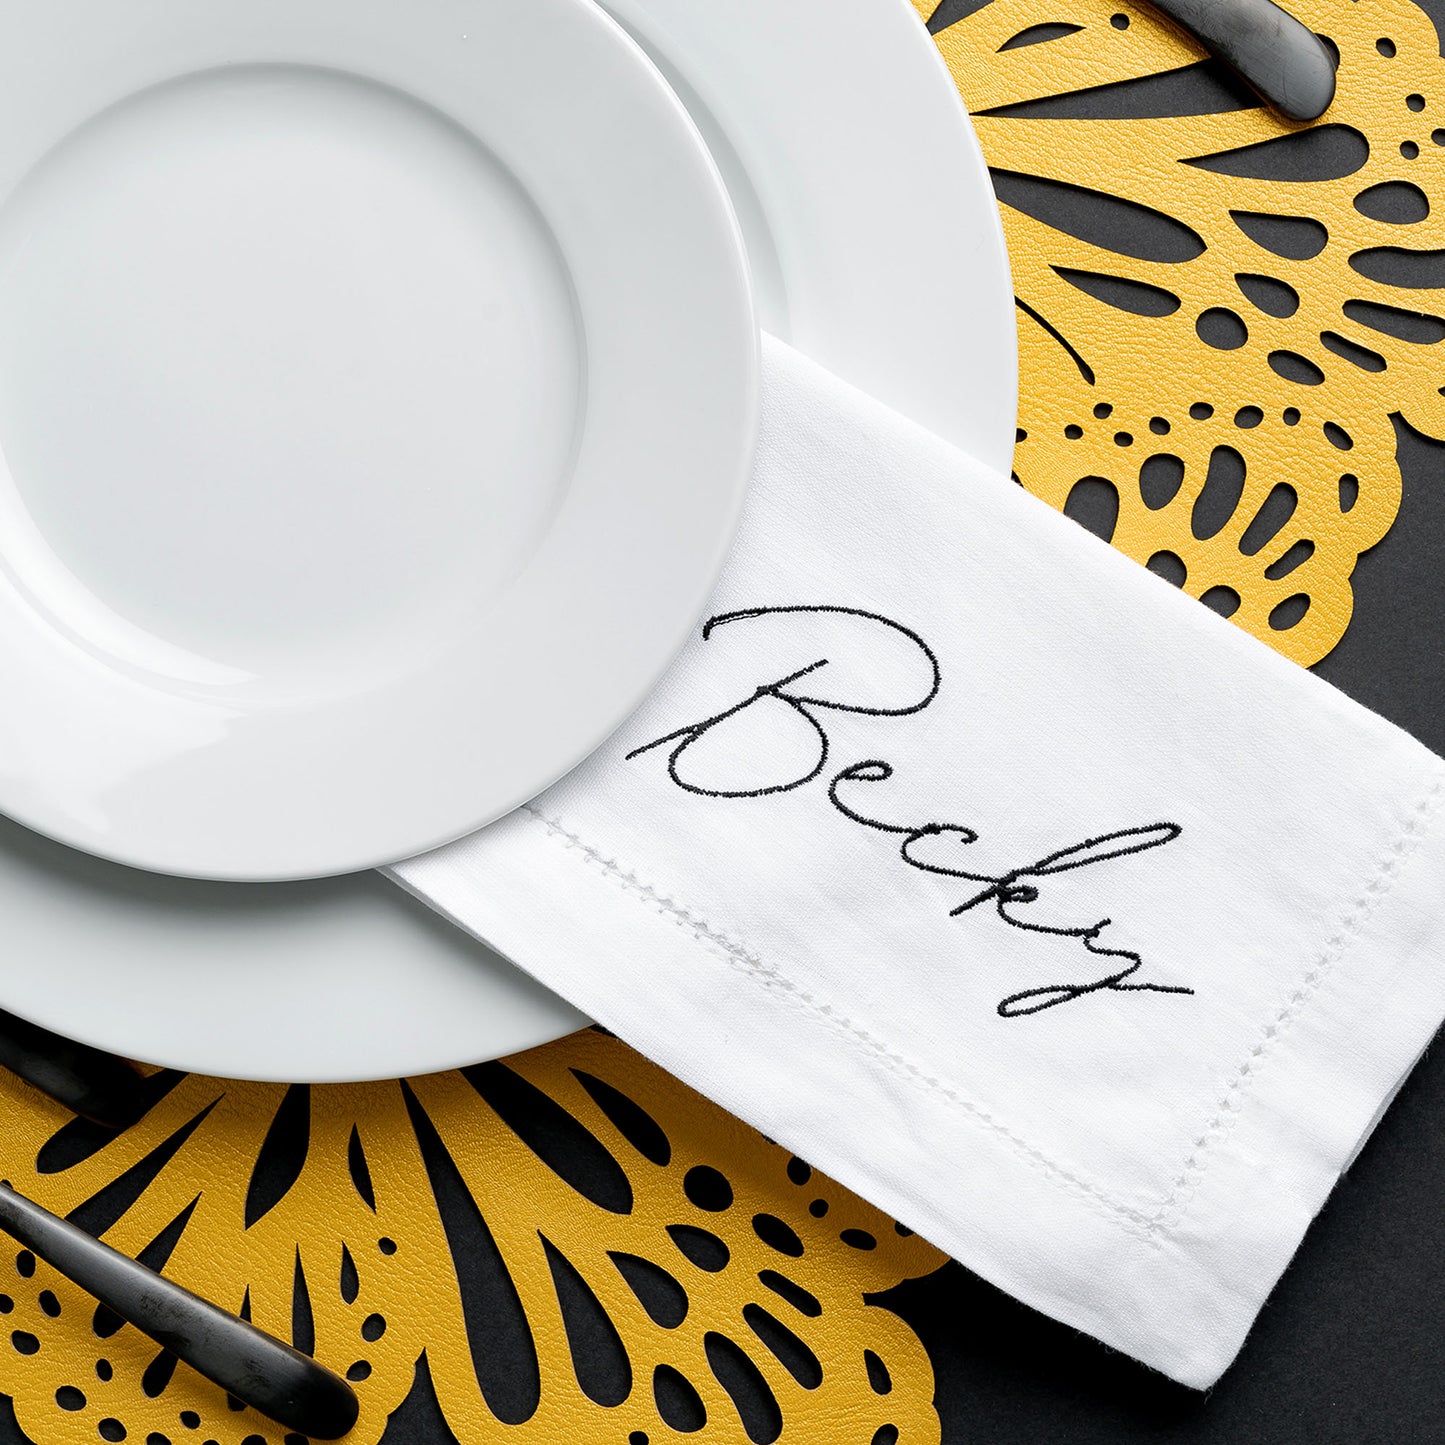 Personalized White Linen Napkins - Set of 12 - Give Wink